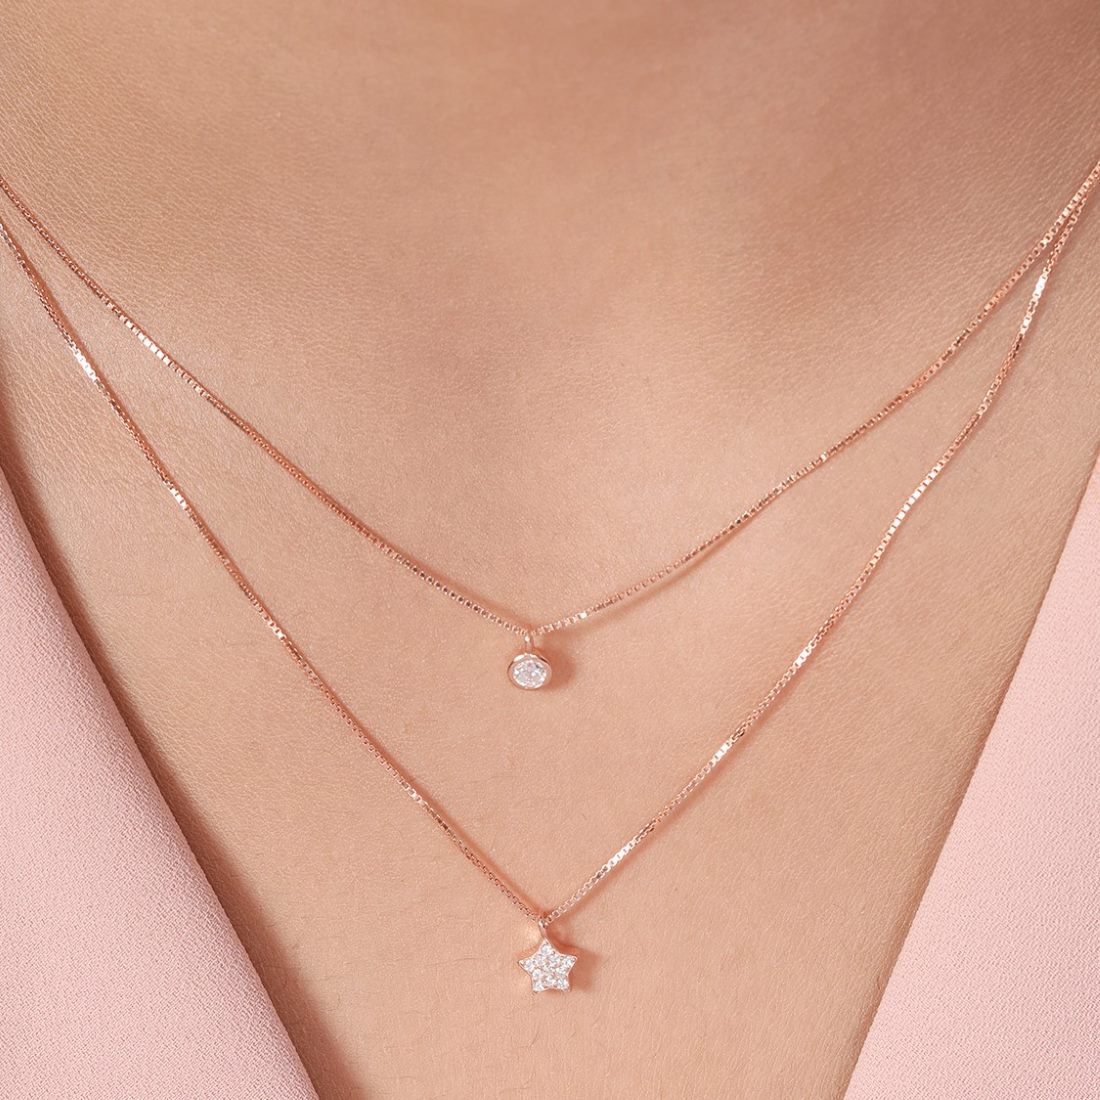 Starry Nights Rose Gold Plated 925 Sterling Silver Necklace